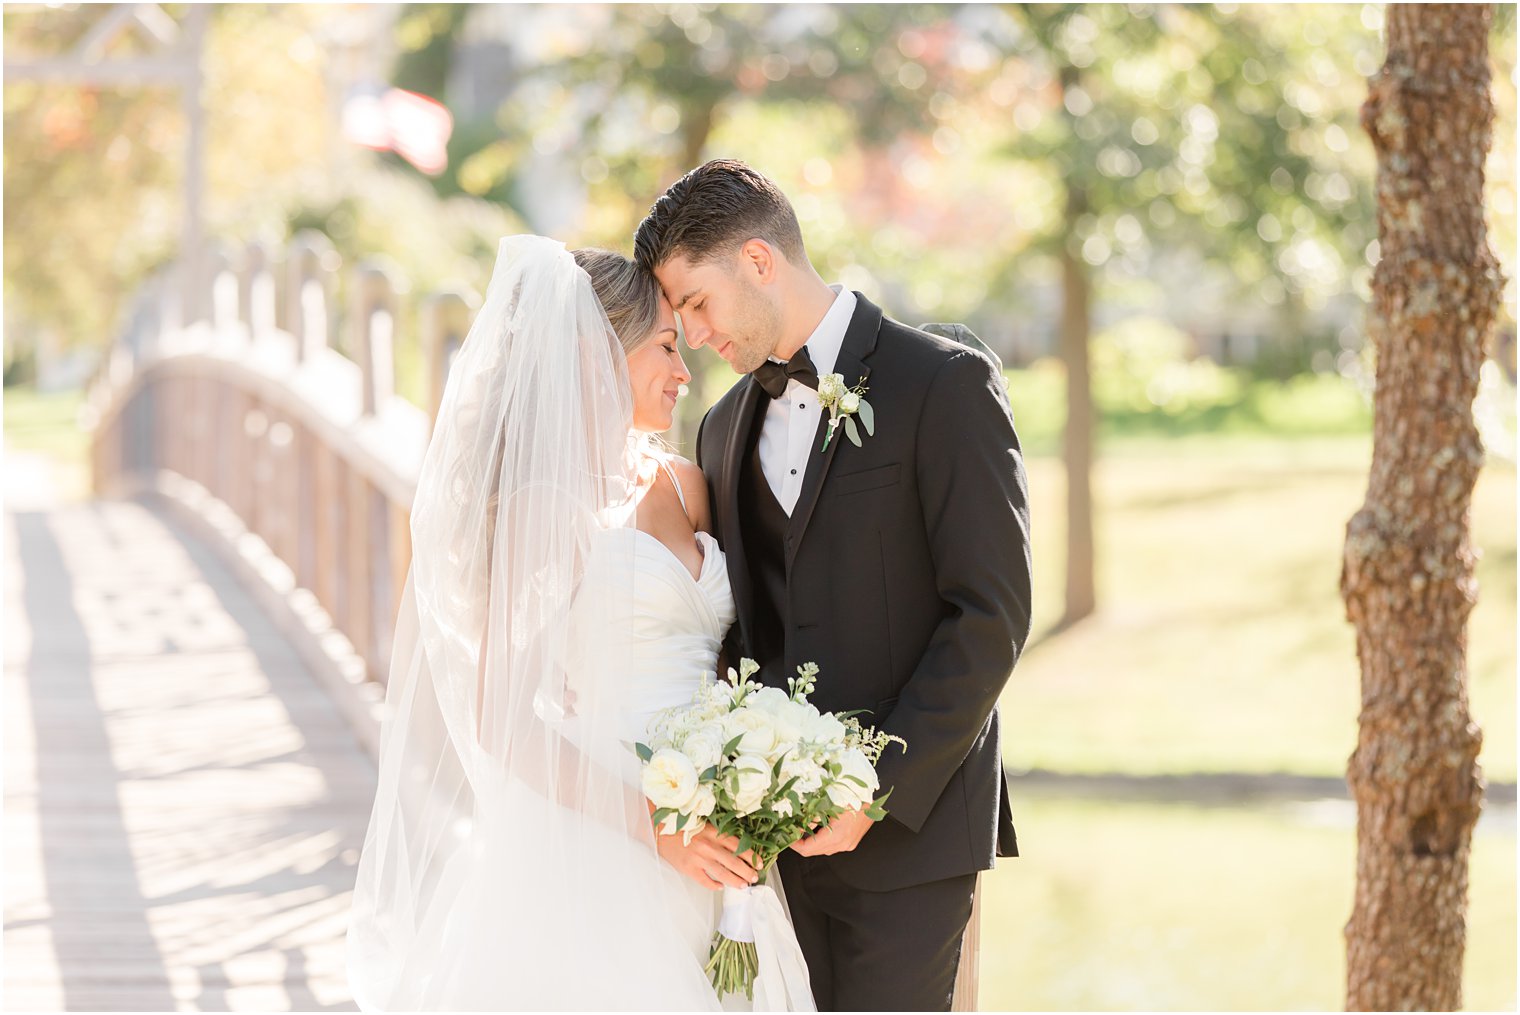 newlyweds pose on wooden bridge in New Jersey